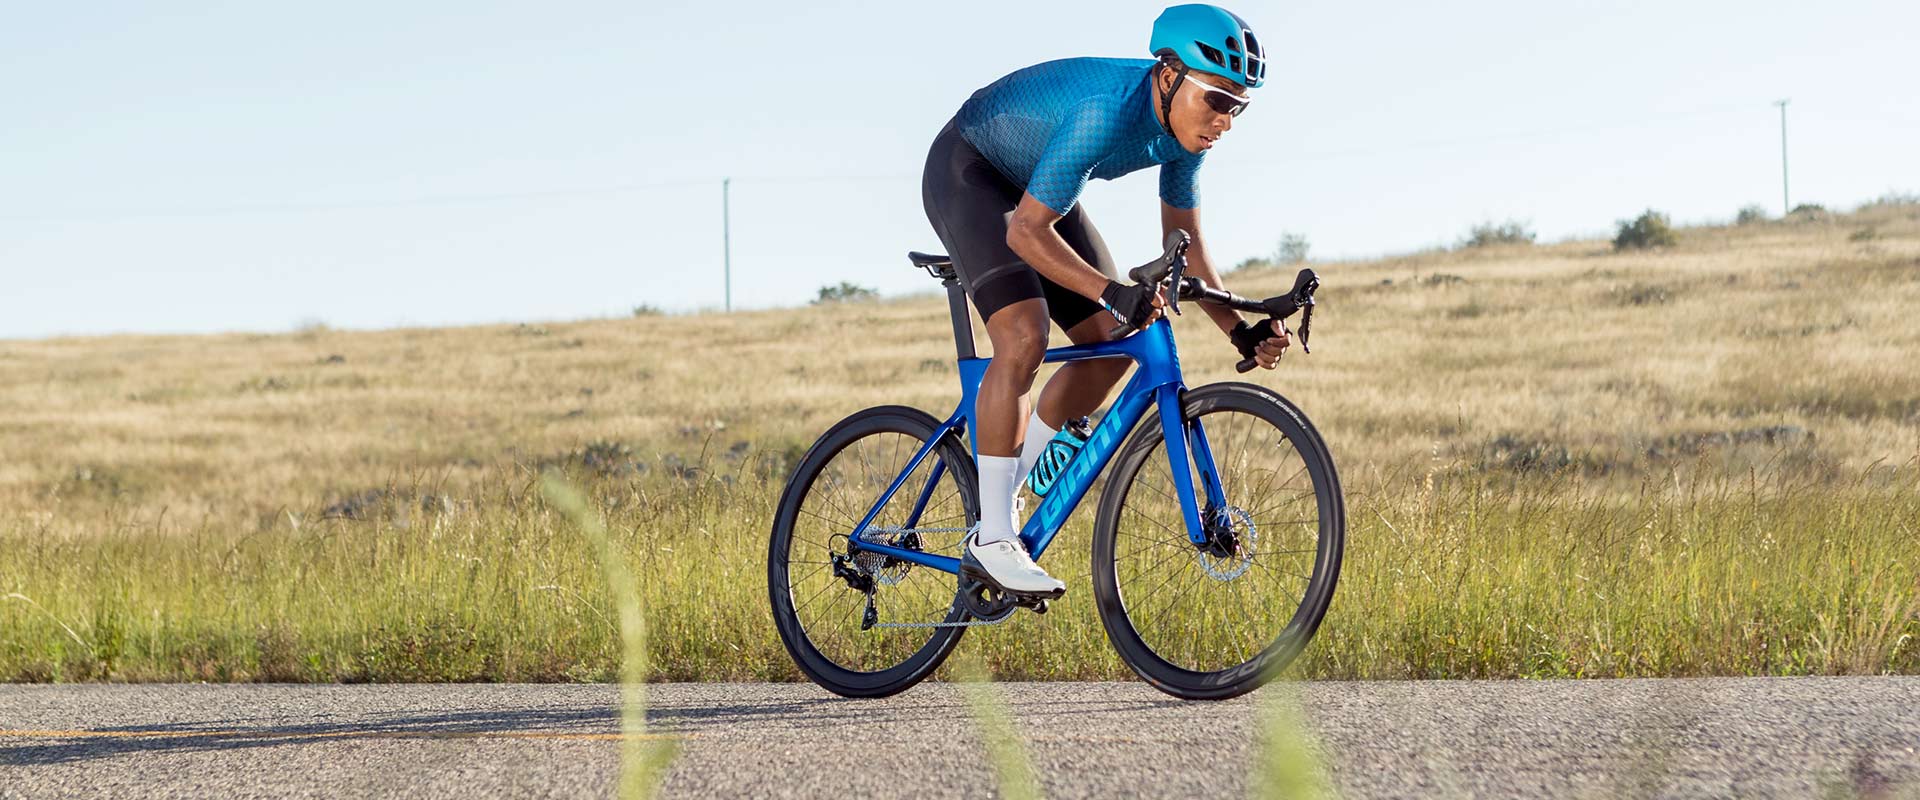 https://static.giant-bicycles.com/Images/Shared/Pages/MY20_Propel_ADV_D_range_banner_1571359421.jpg